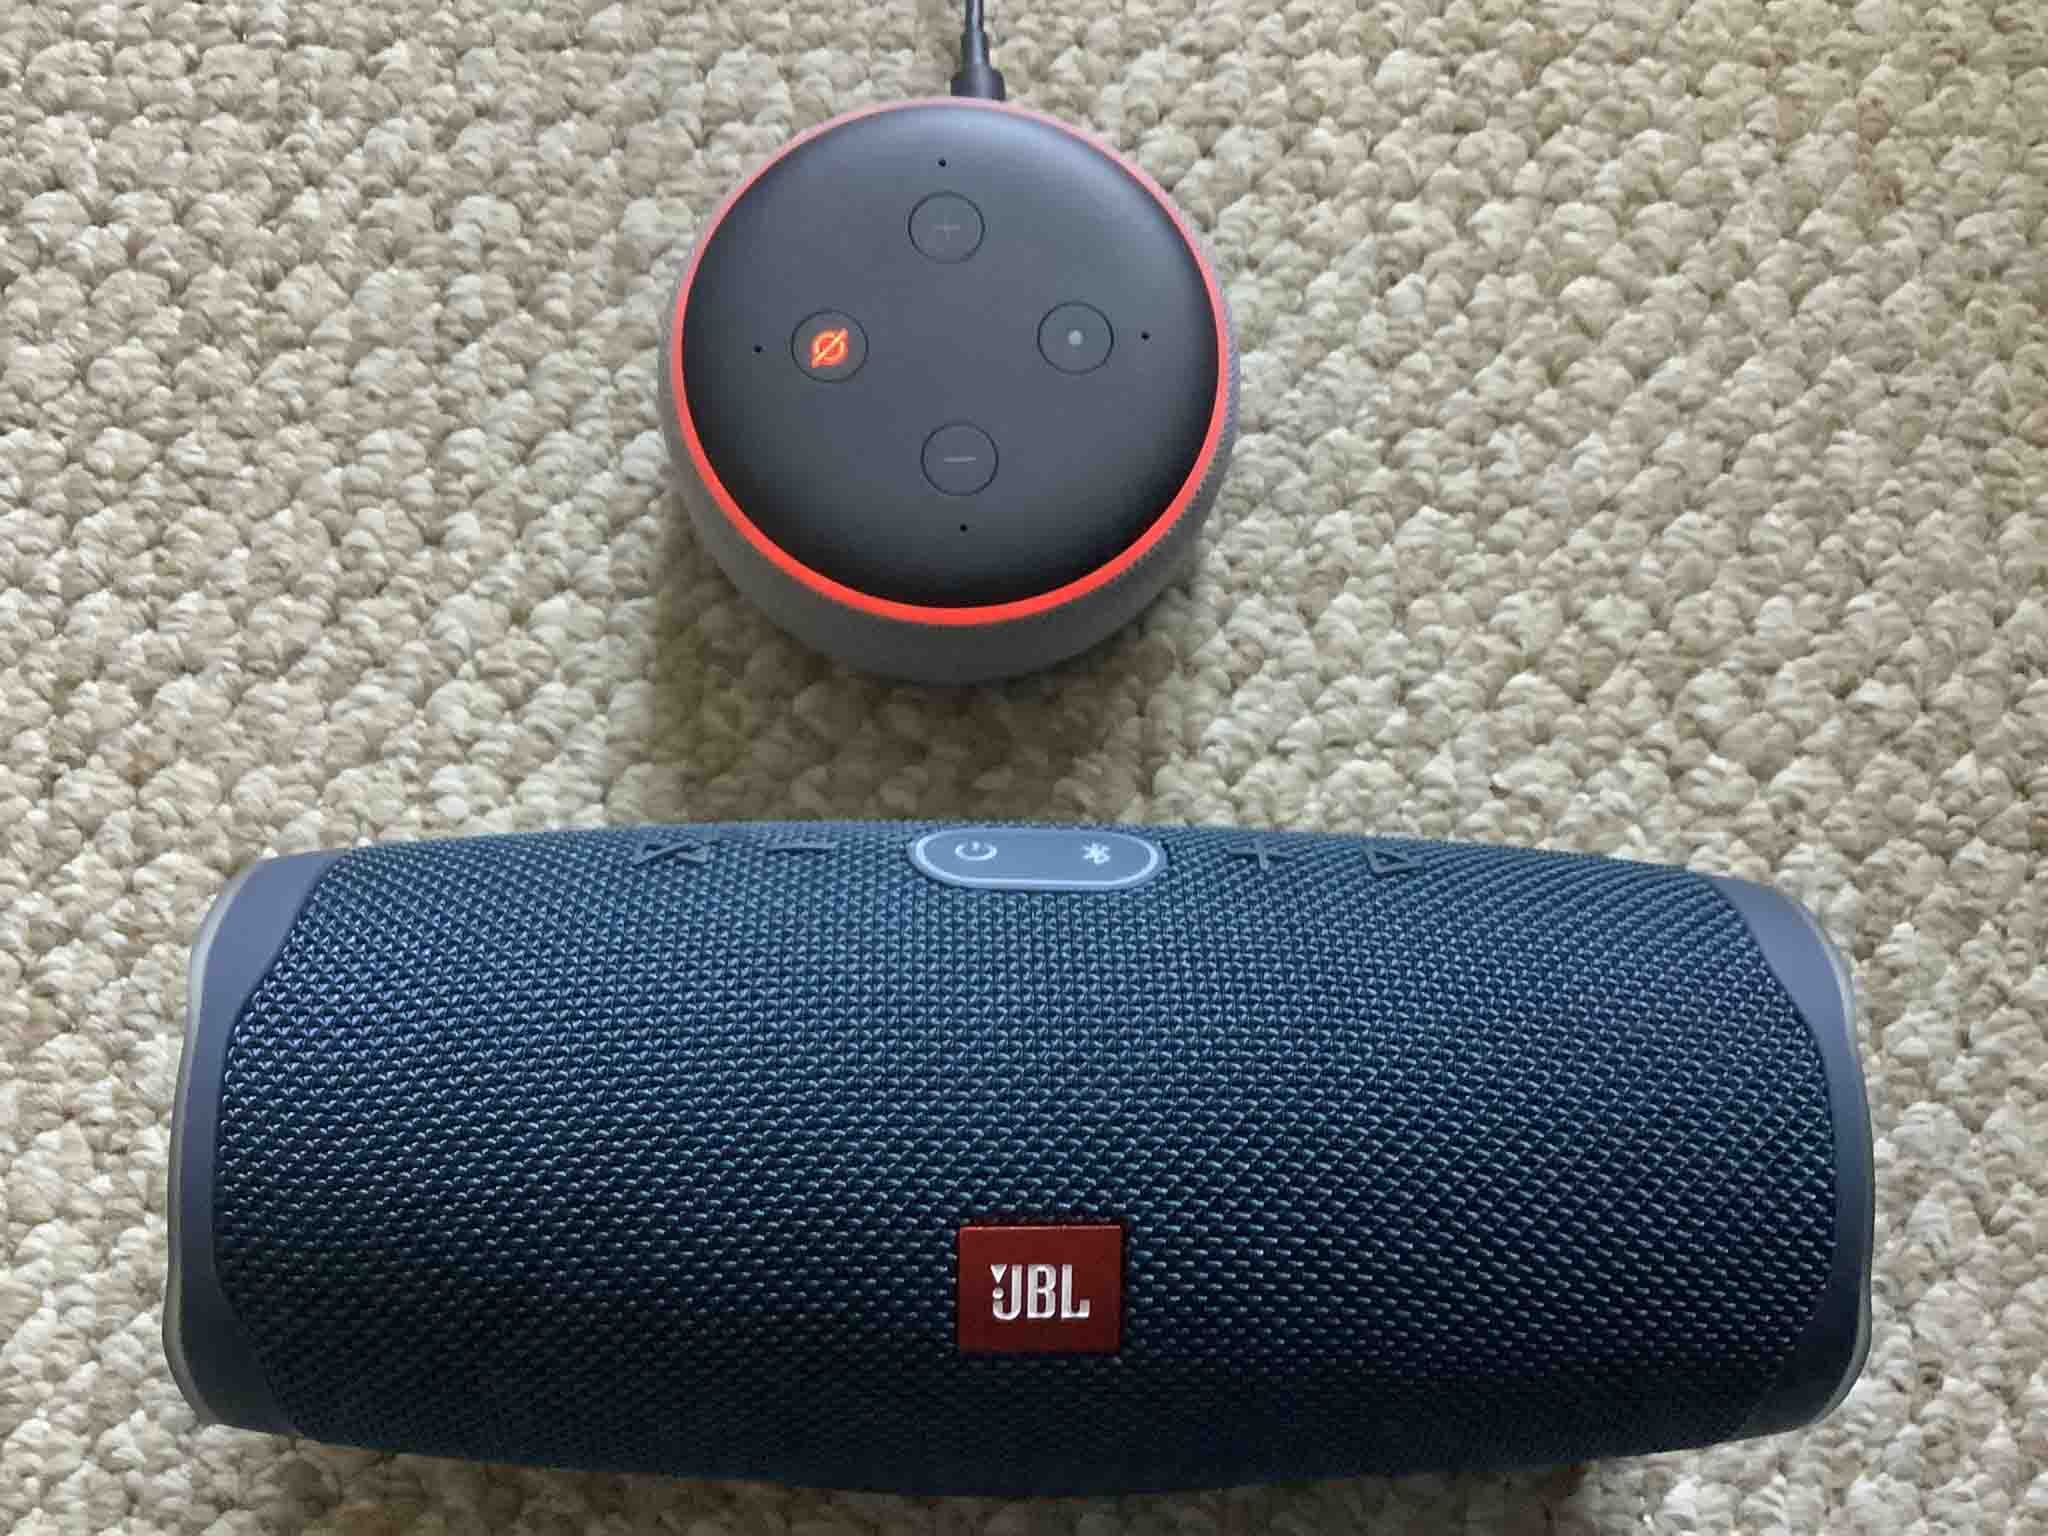 How to Connect JBL Charge to Alexa - Stop